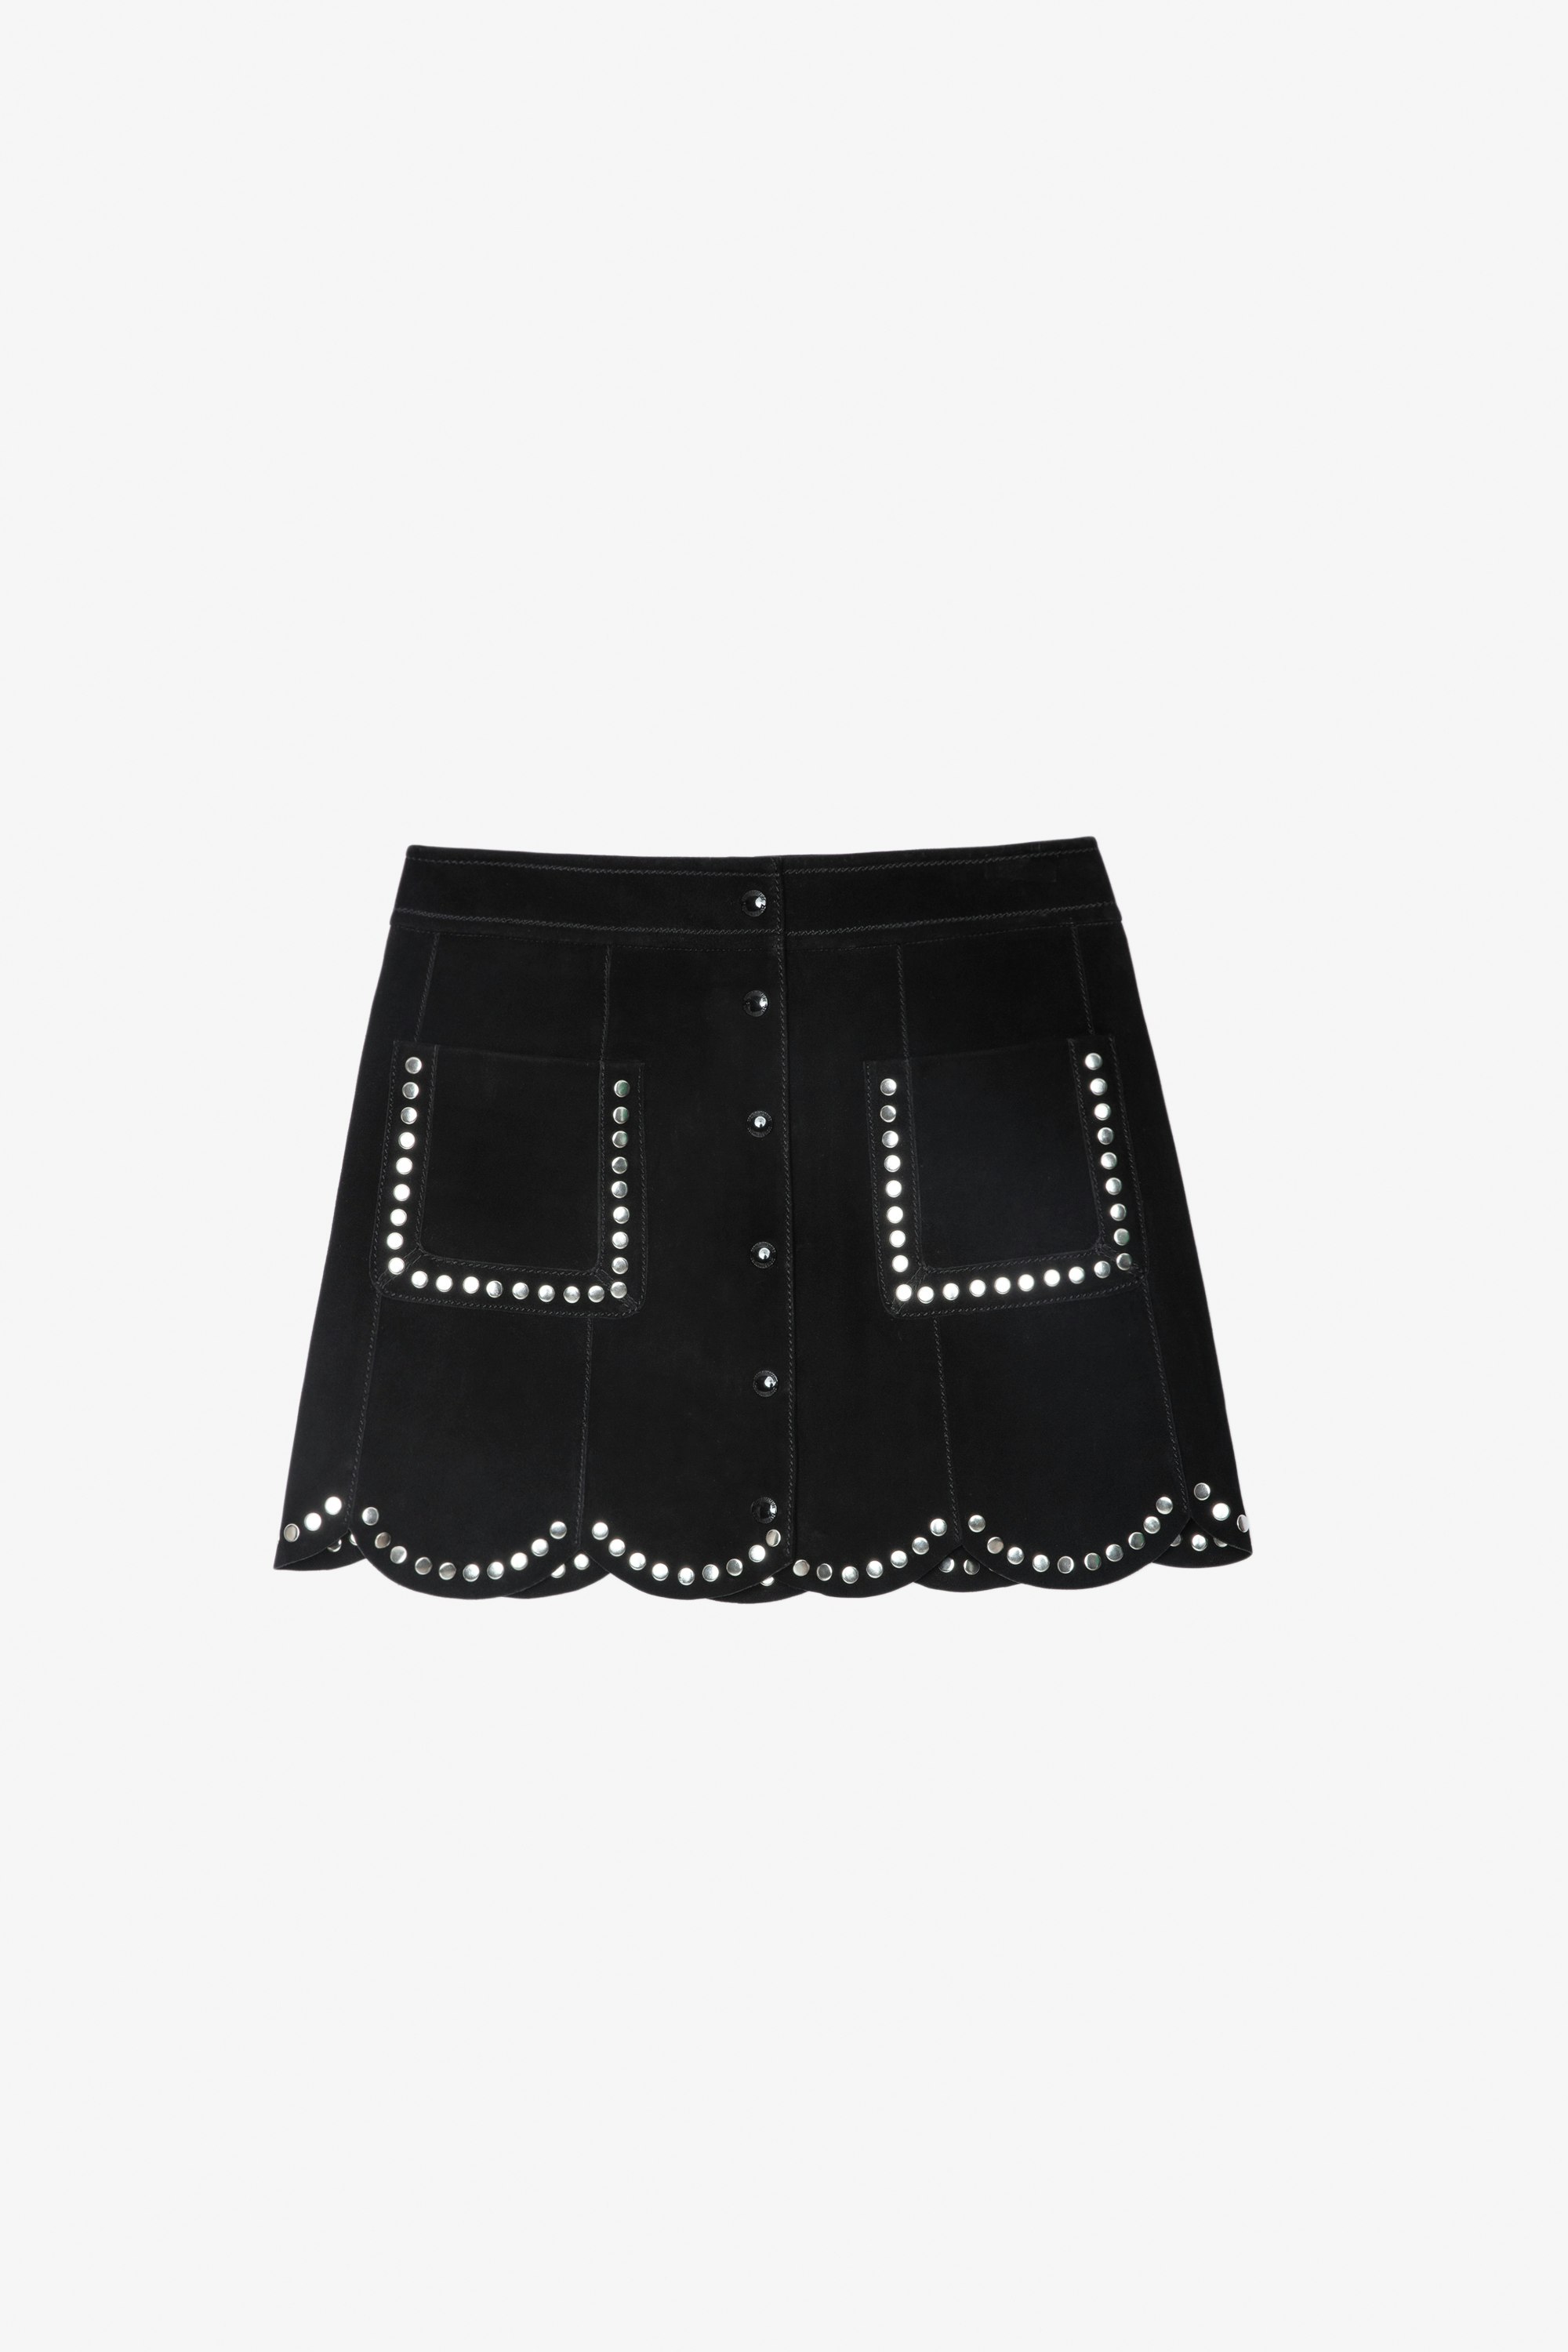 Jasia Studded Suede Skirt Women’s black suede skirt with silver-tone studs